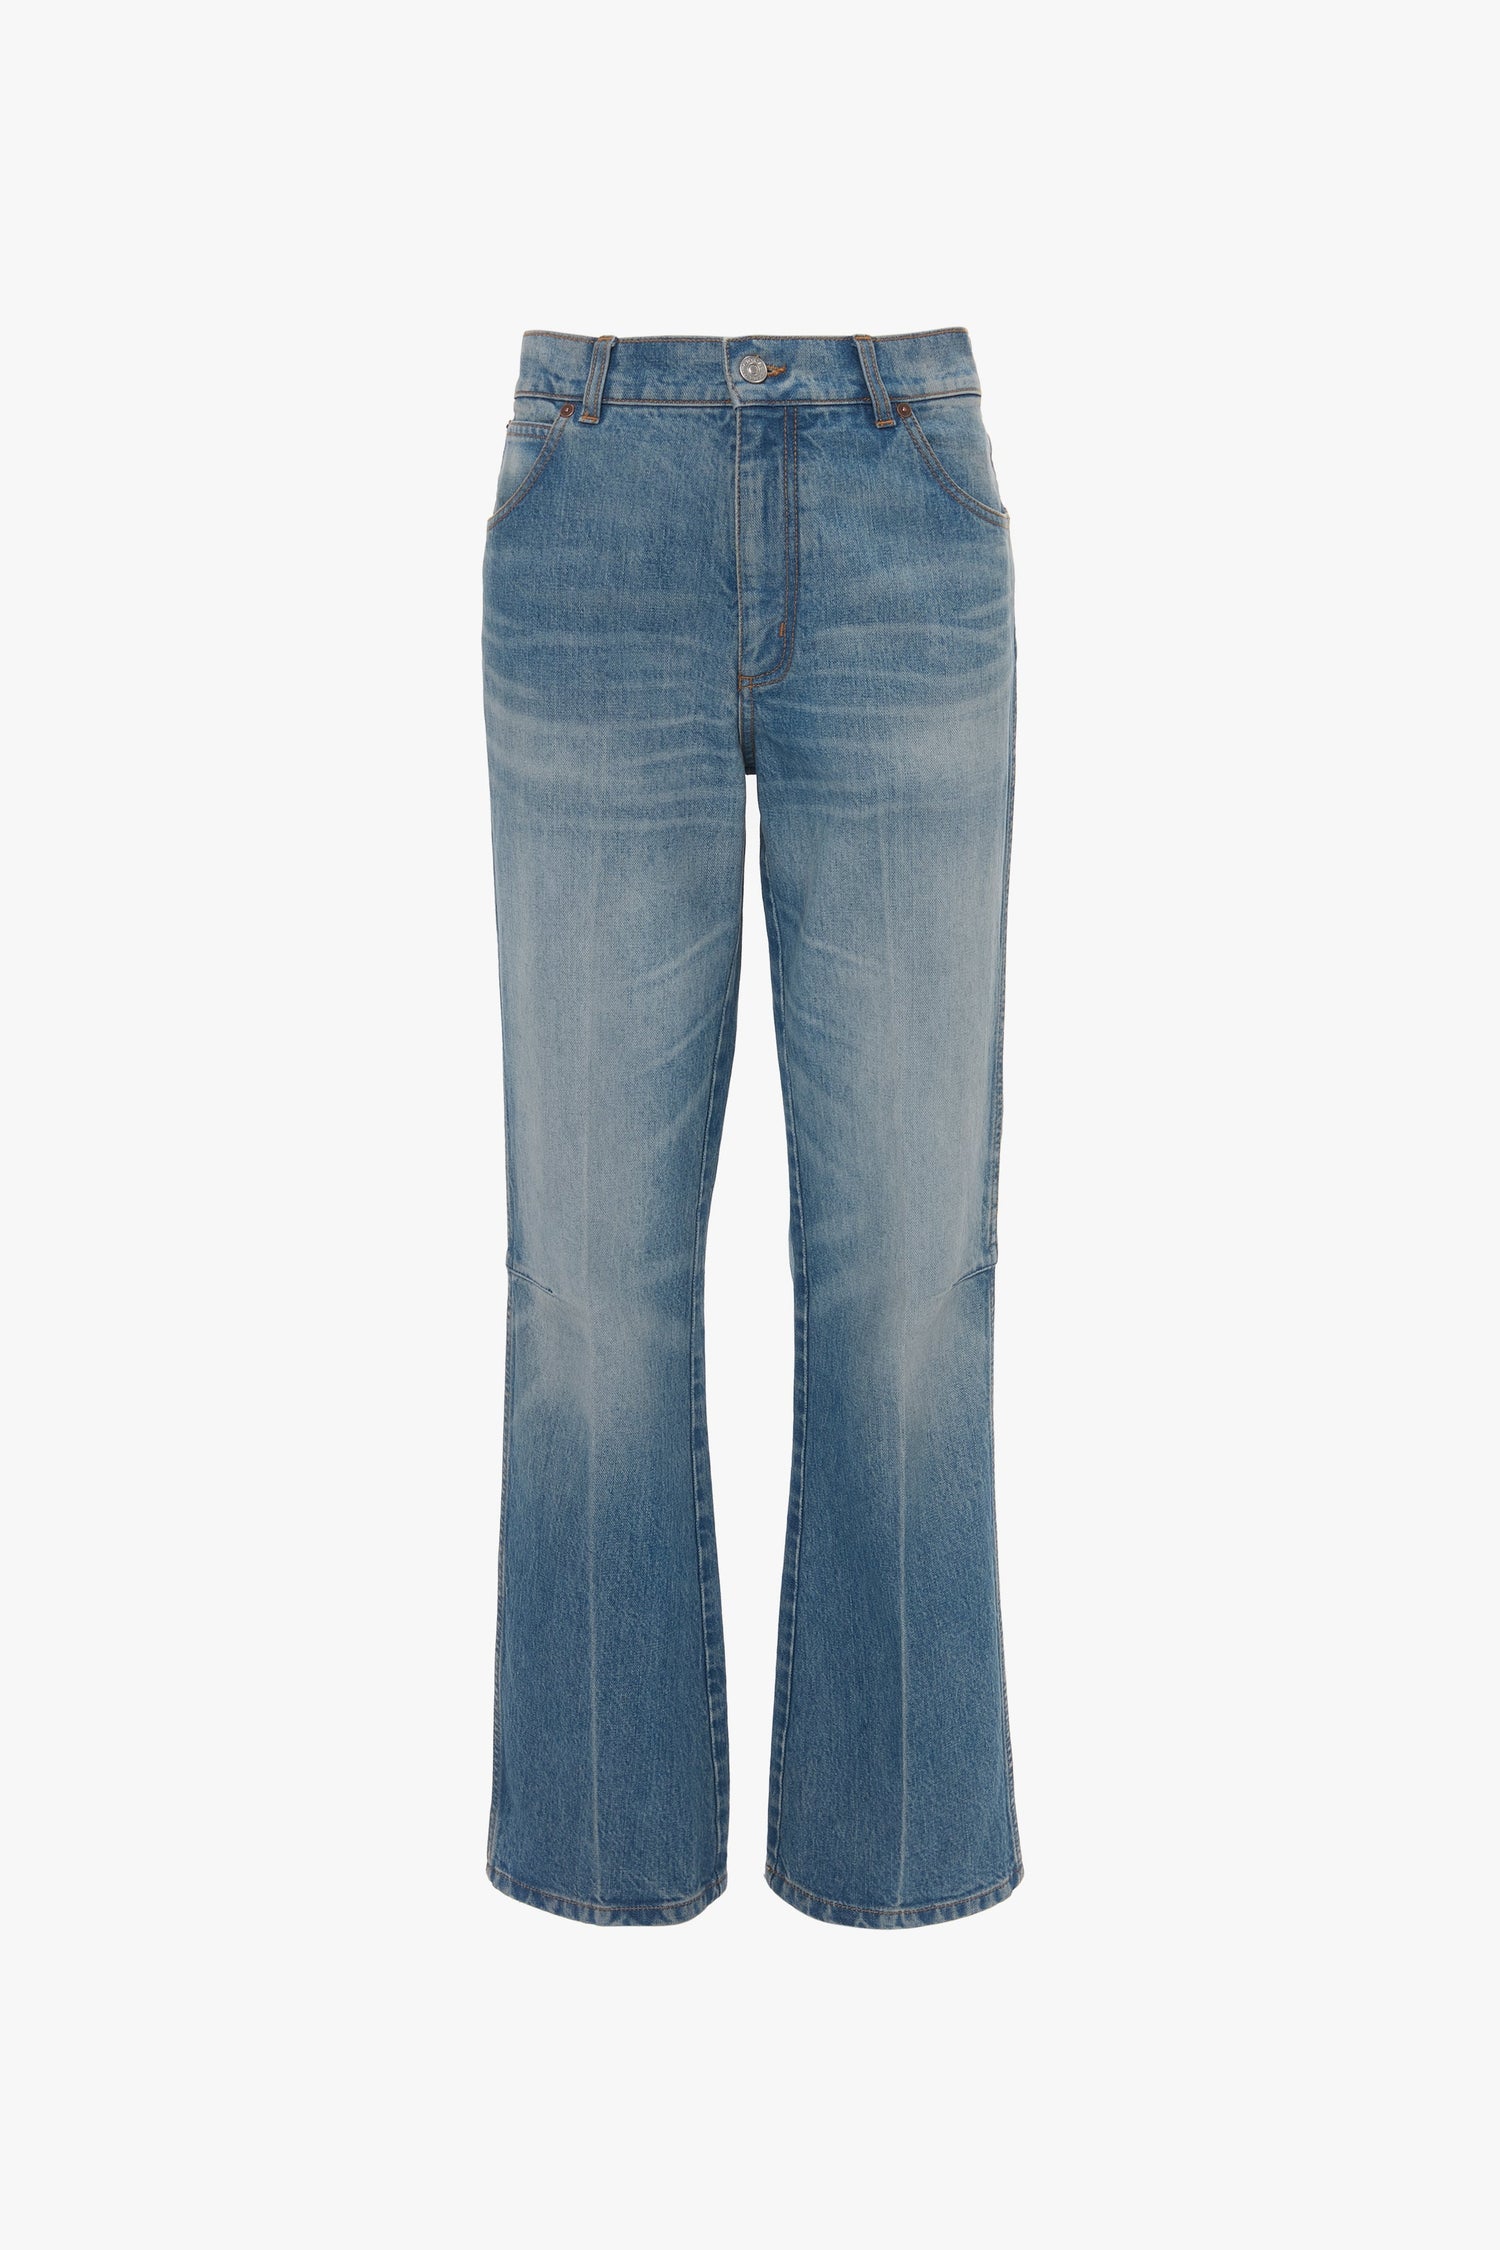 A pair of Relaxed Flared Jean In Broken Vintage Wash by Victoria Beckham with a straight leg cut, front pockets, and belt loops against a white background, featuring subtle deconstructed detailing.